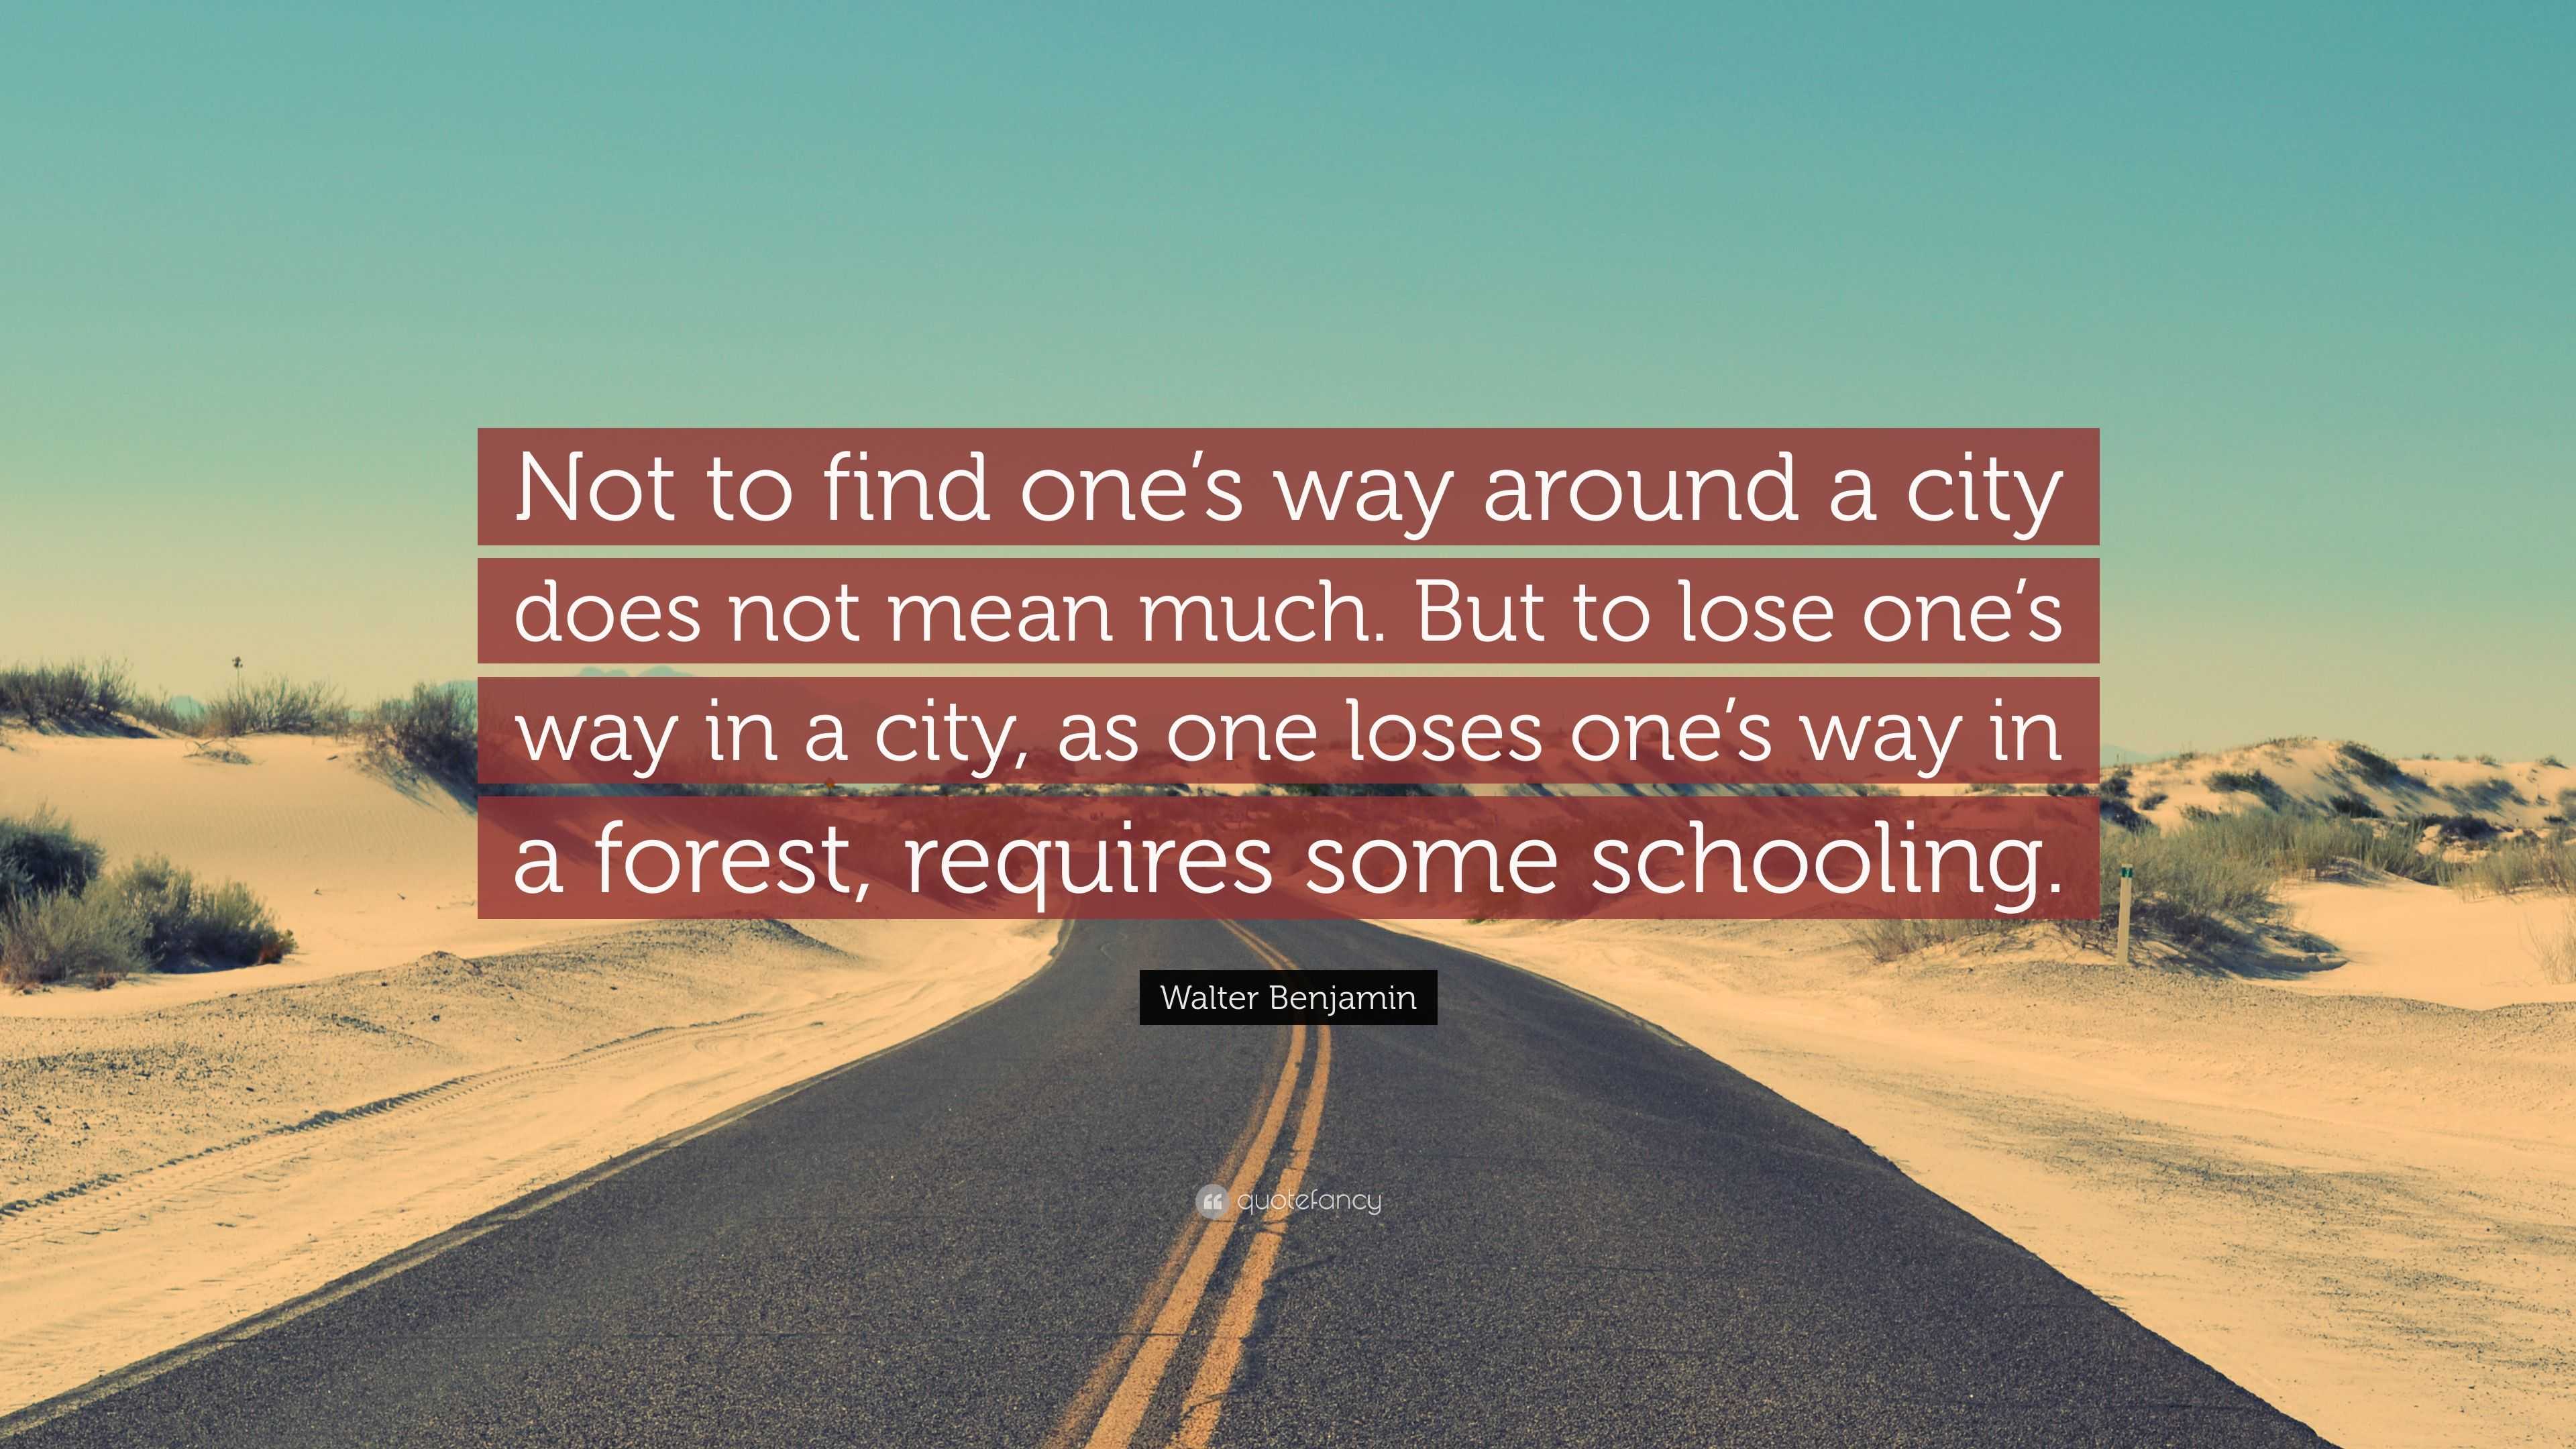 Walter Benjamin Quote: “Not to find one's way around a city does ...